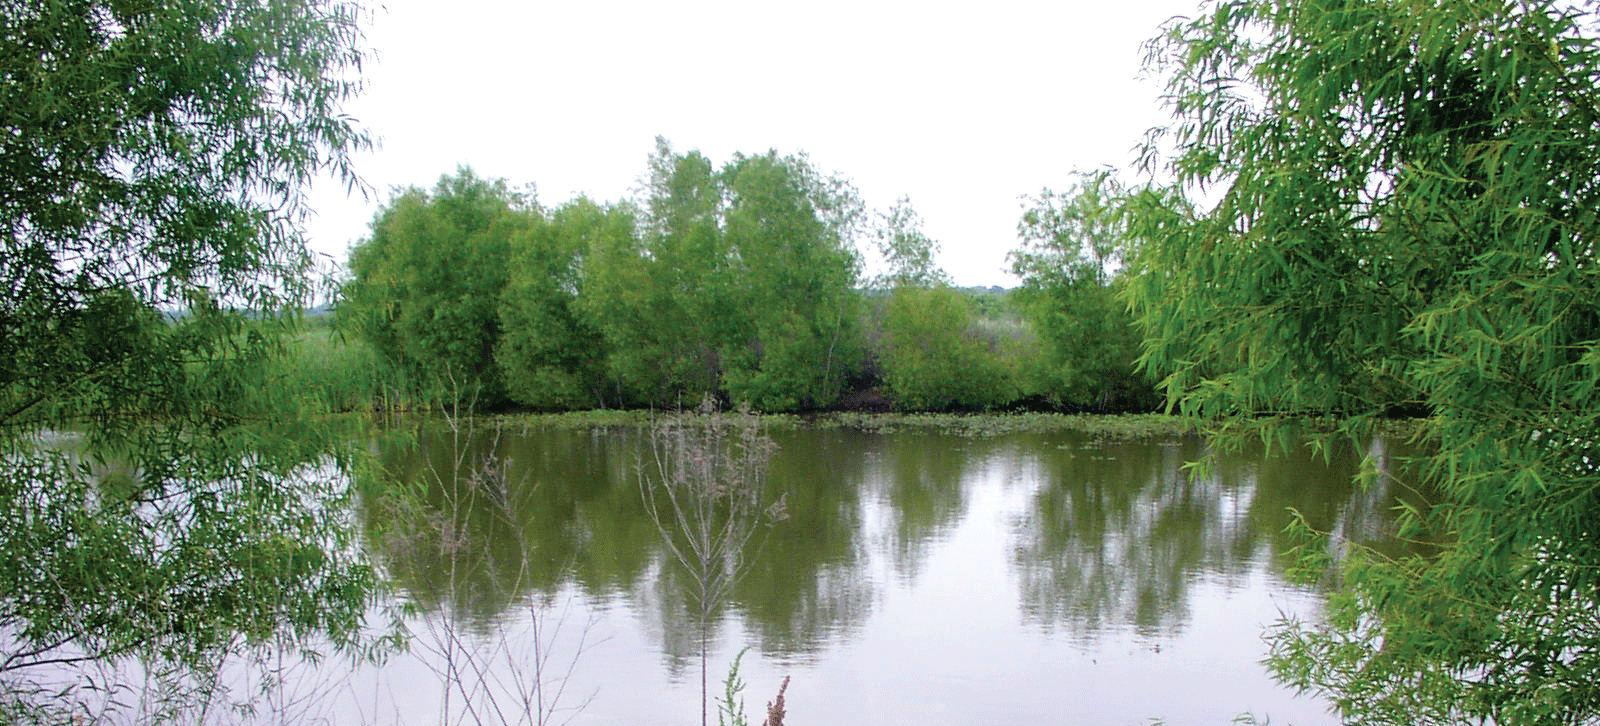 Photograph of a small body of water surrounded by lush trees.